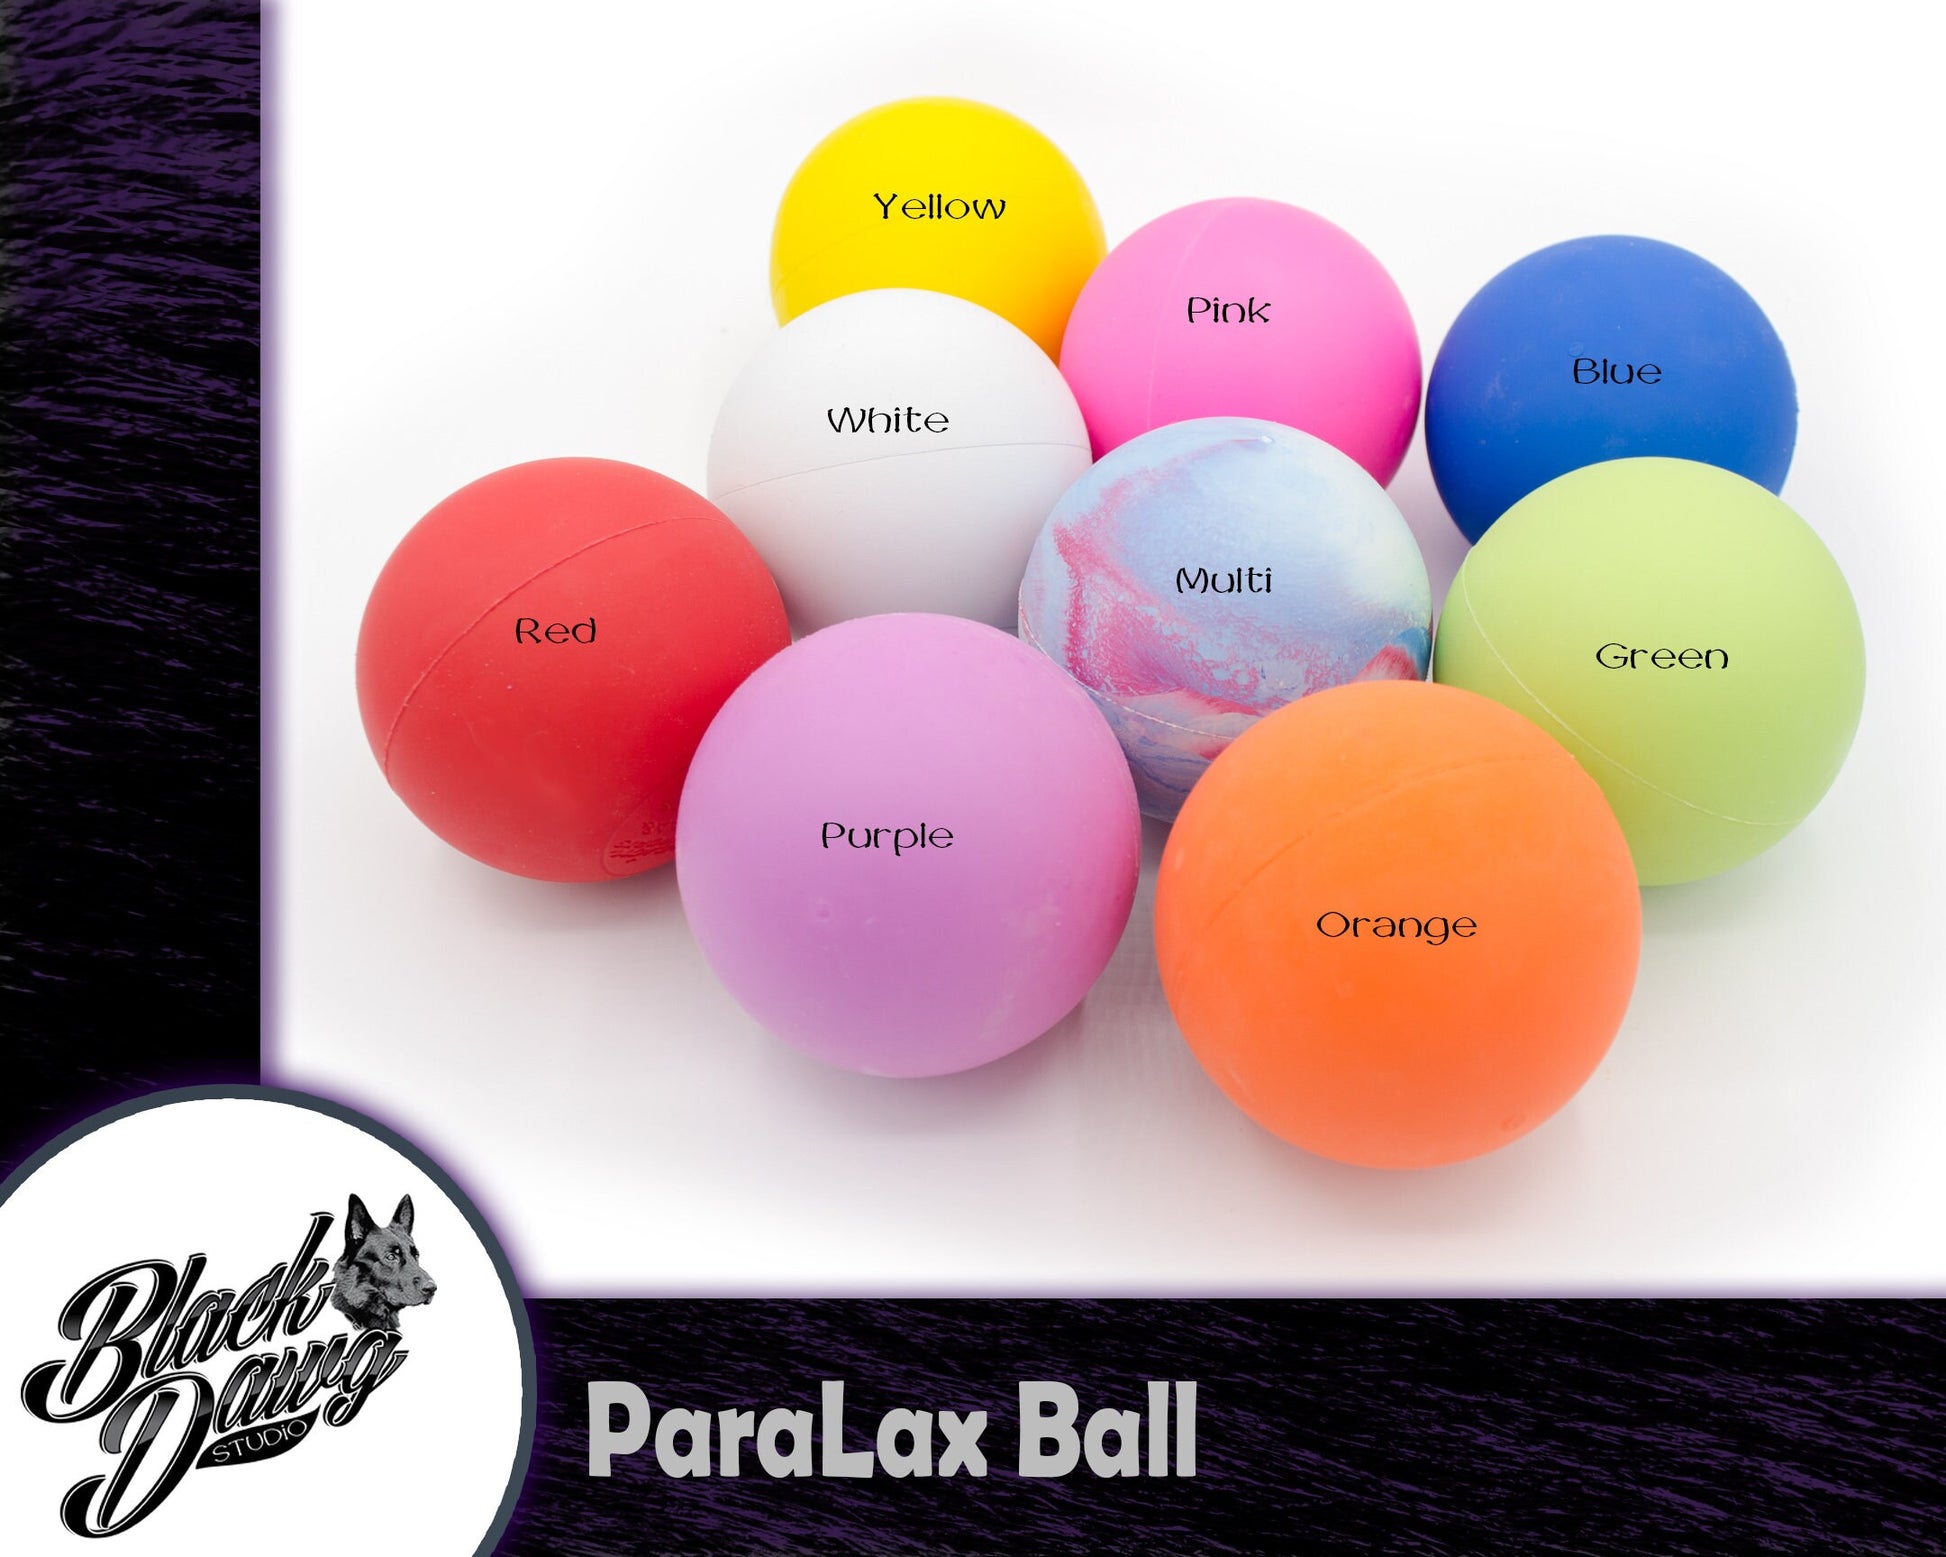 ParaLax Dog Training Ball with Braided Loop Handle